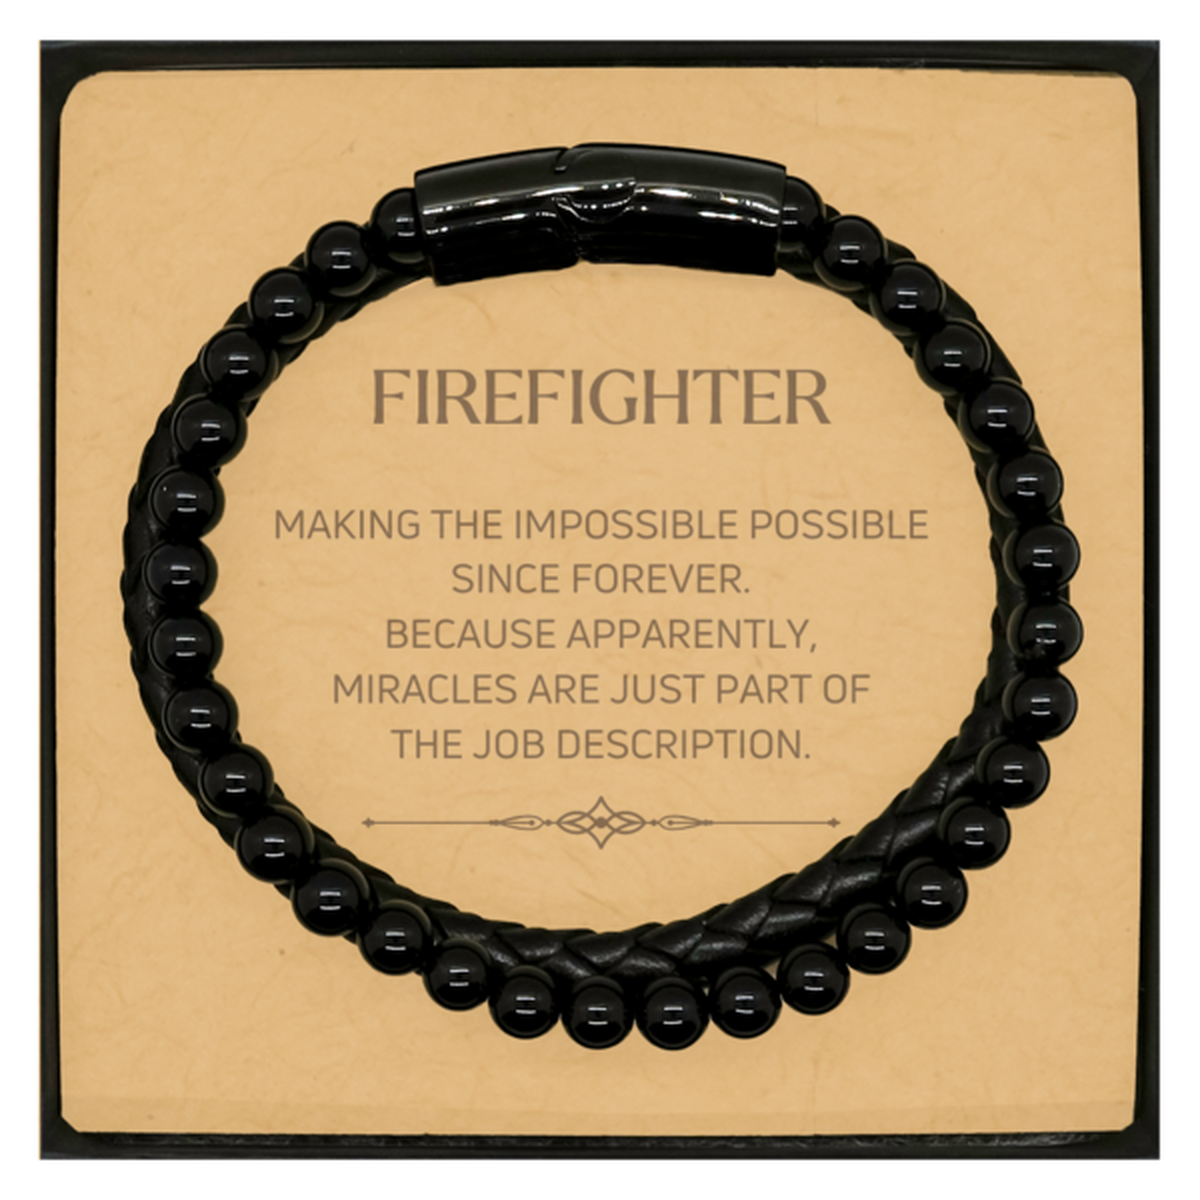 Funny Firefighter Gifts, Miracles are just part of the job description, Inspirational Birthday Christmas Stone Leather Bracelets For Firefighter, Men, Women, Coworkers, Friends, Boss